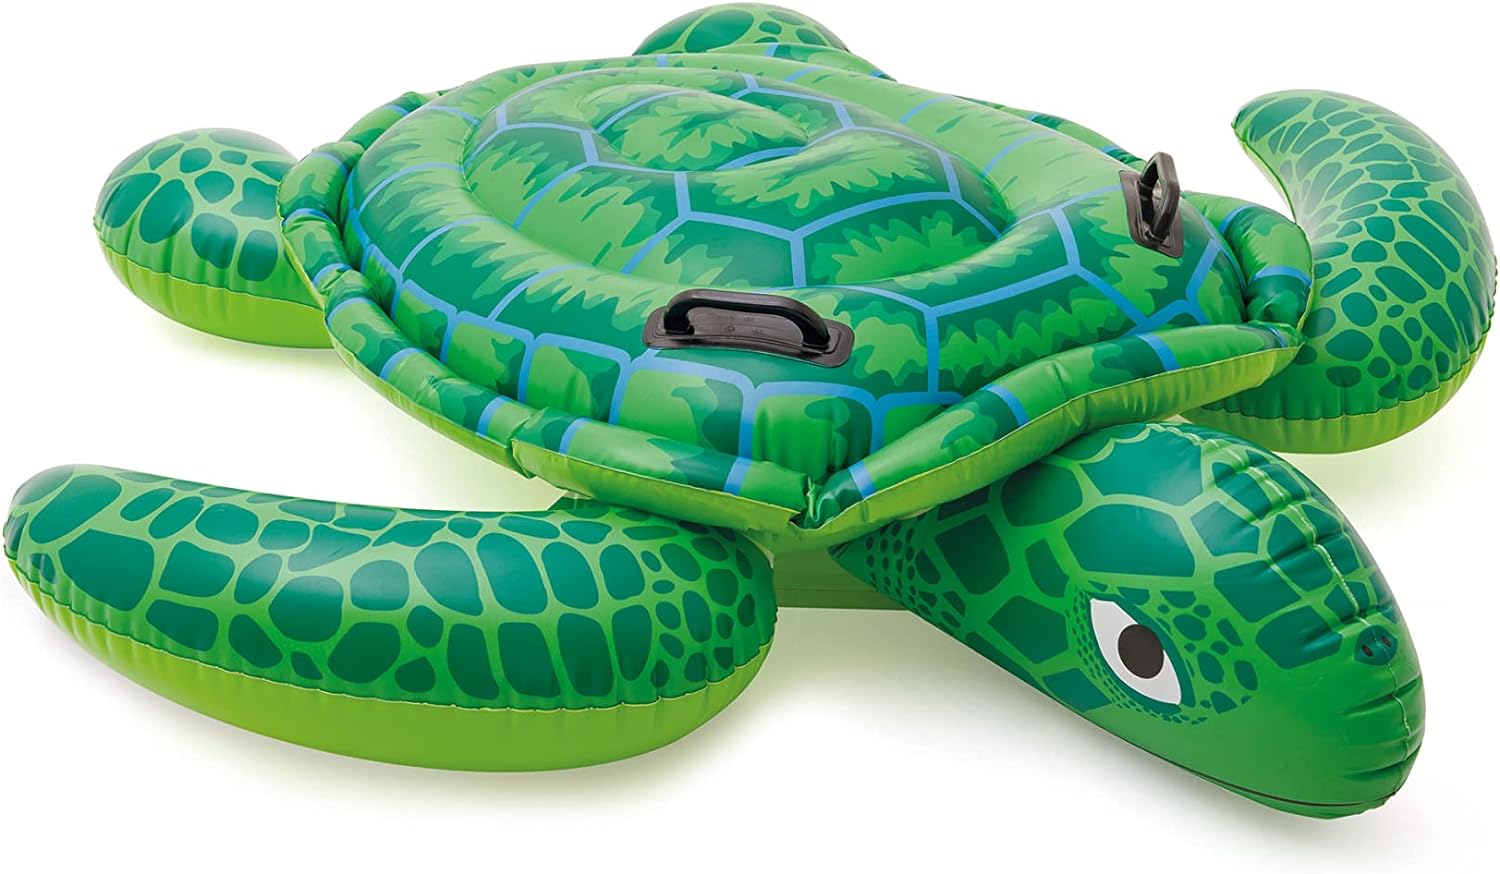 Intex Lil' Sea Turtle Ride-On, 59 X 50, for Ages 3+